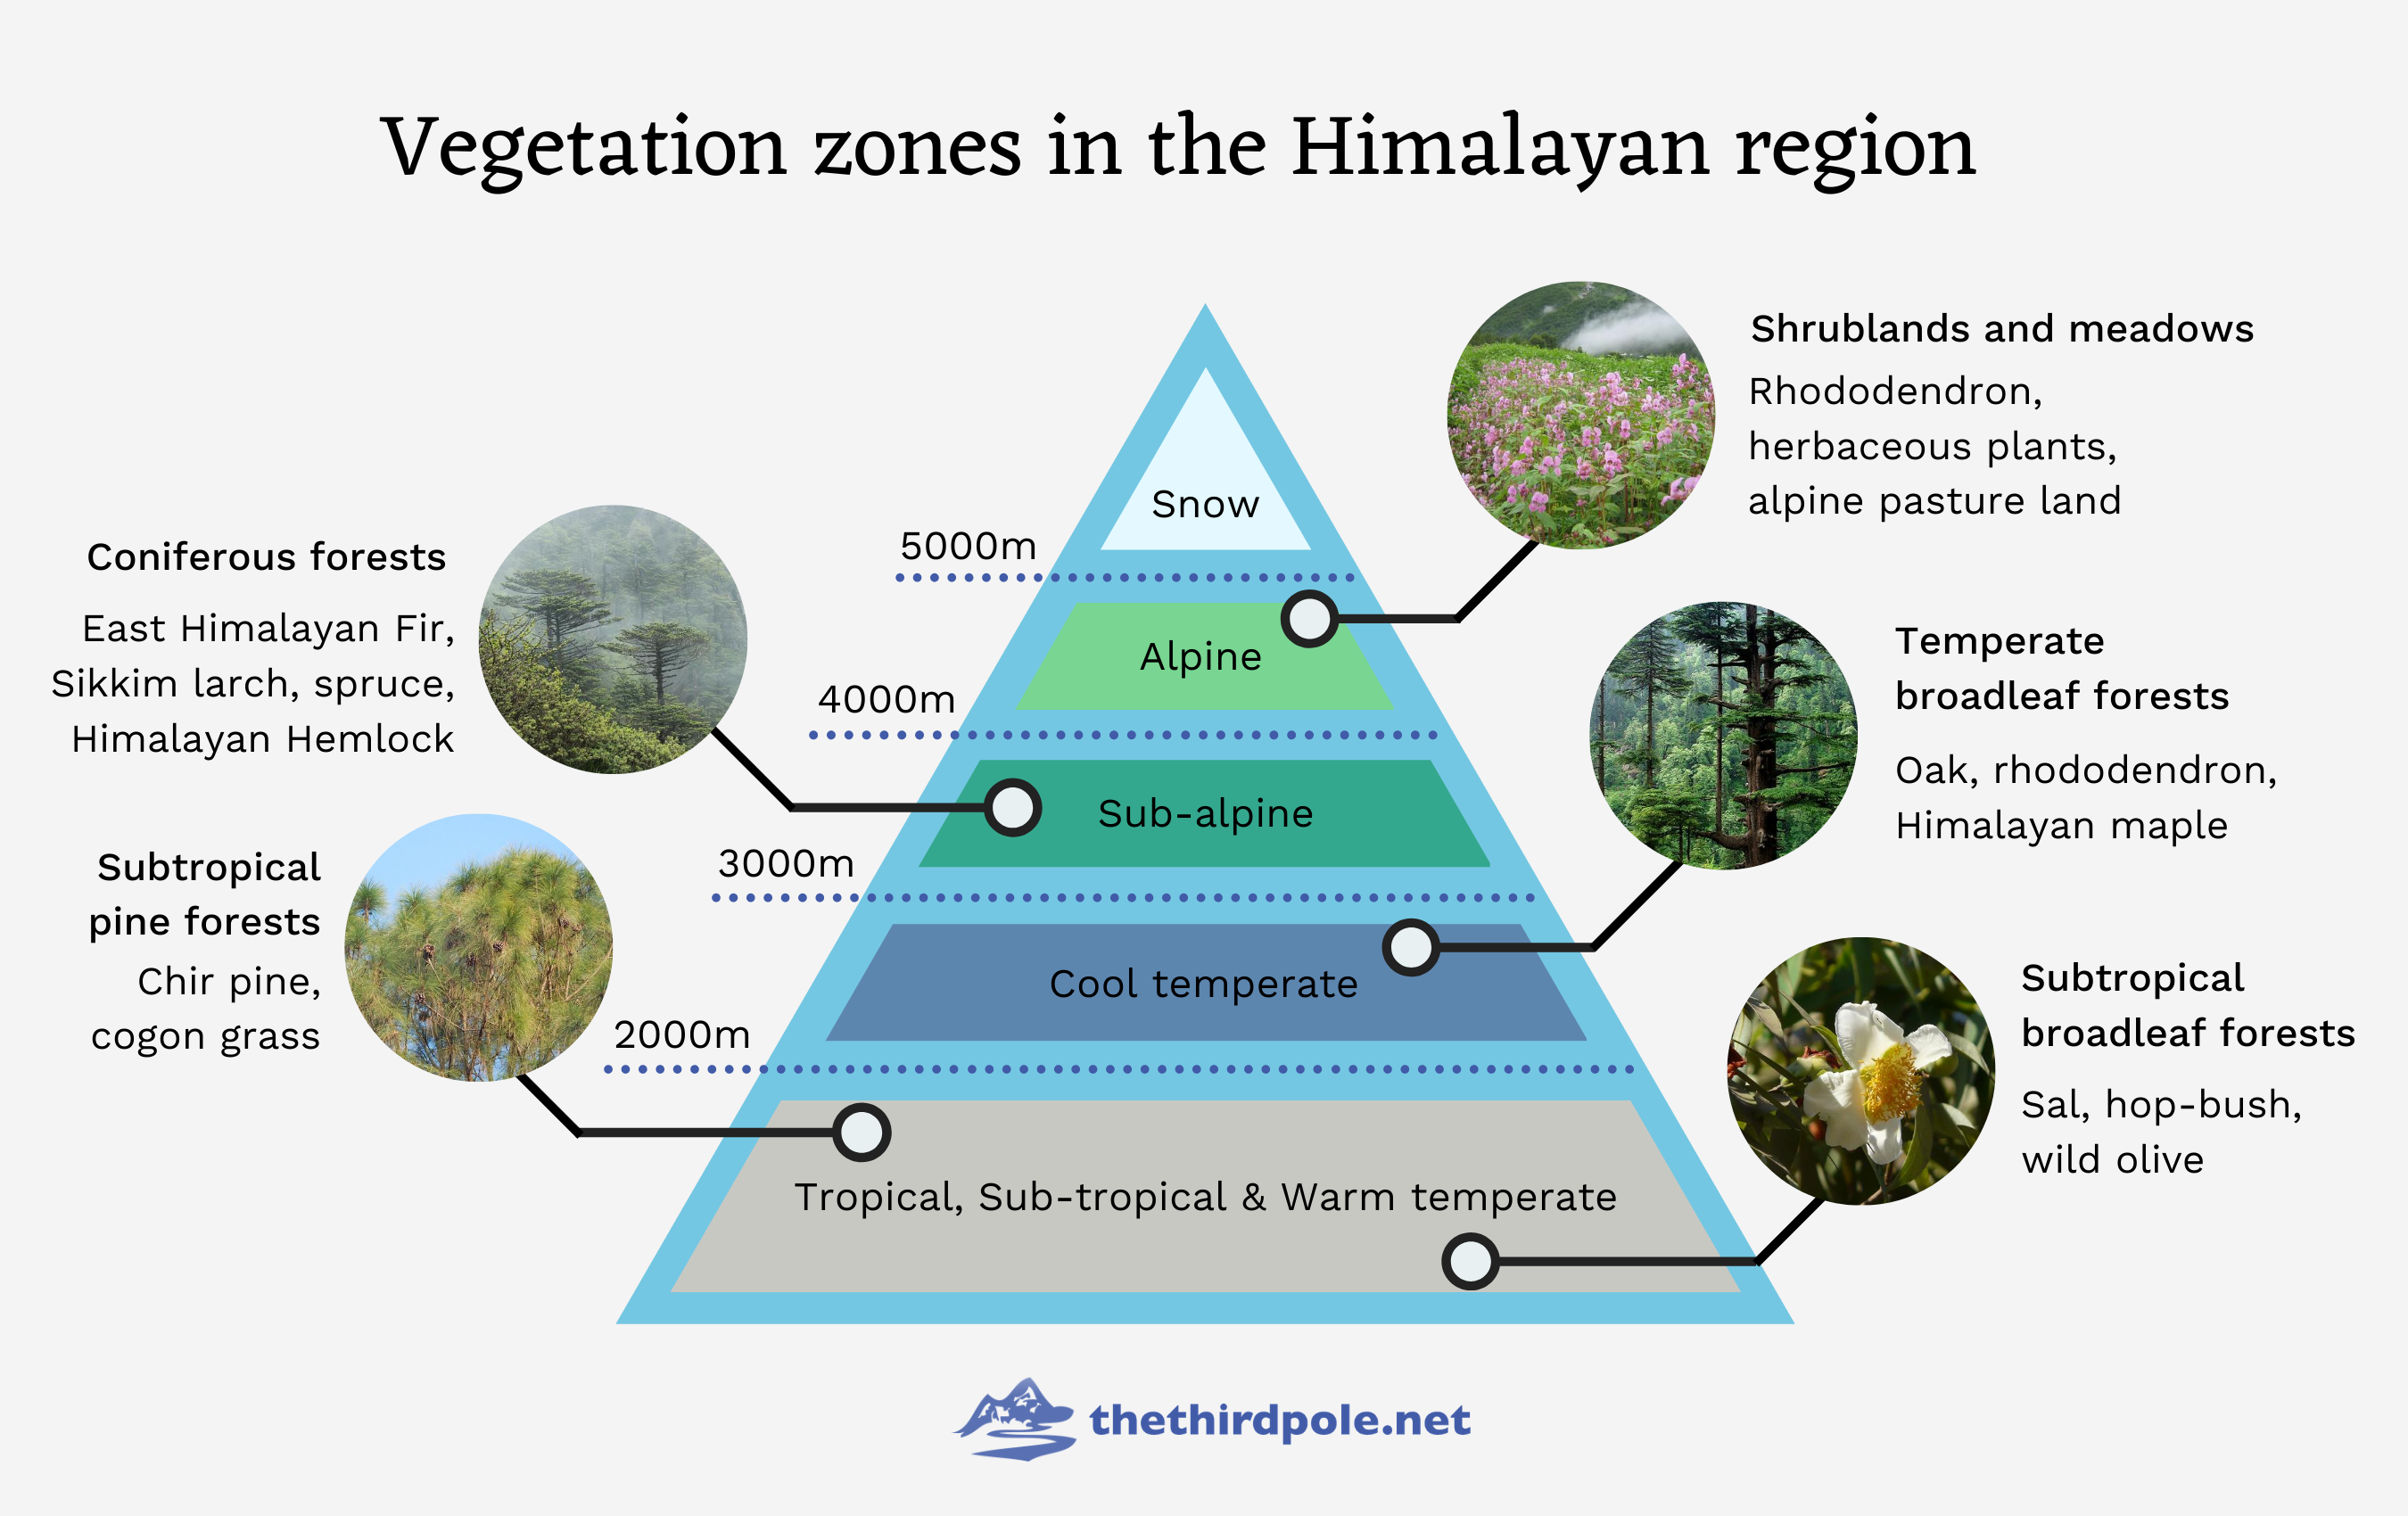 Vegetation zones in the Himalayas